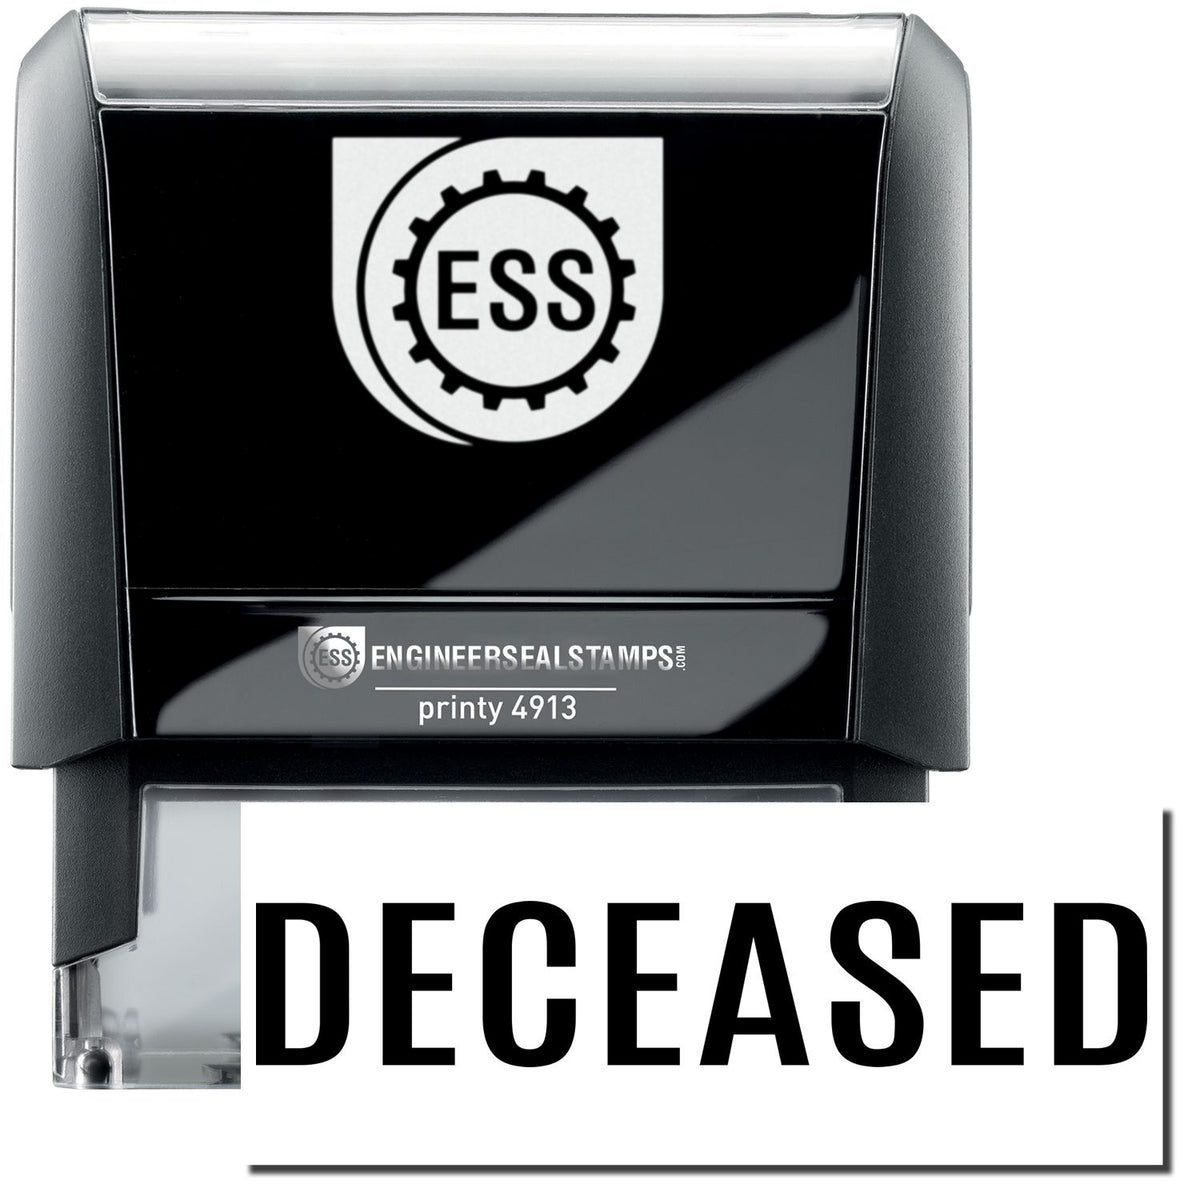 A self-inking stamp with a stamped image showing how the text &quot;DECEASED&quot; in a large bold font is displayed by it after stamping.